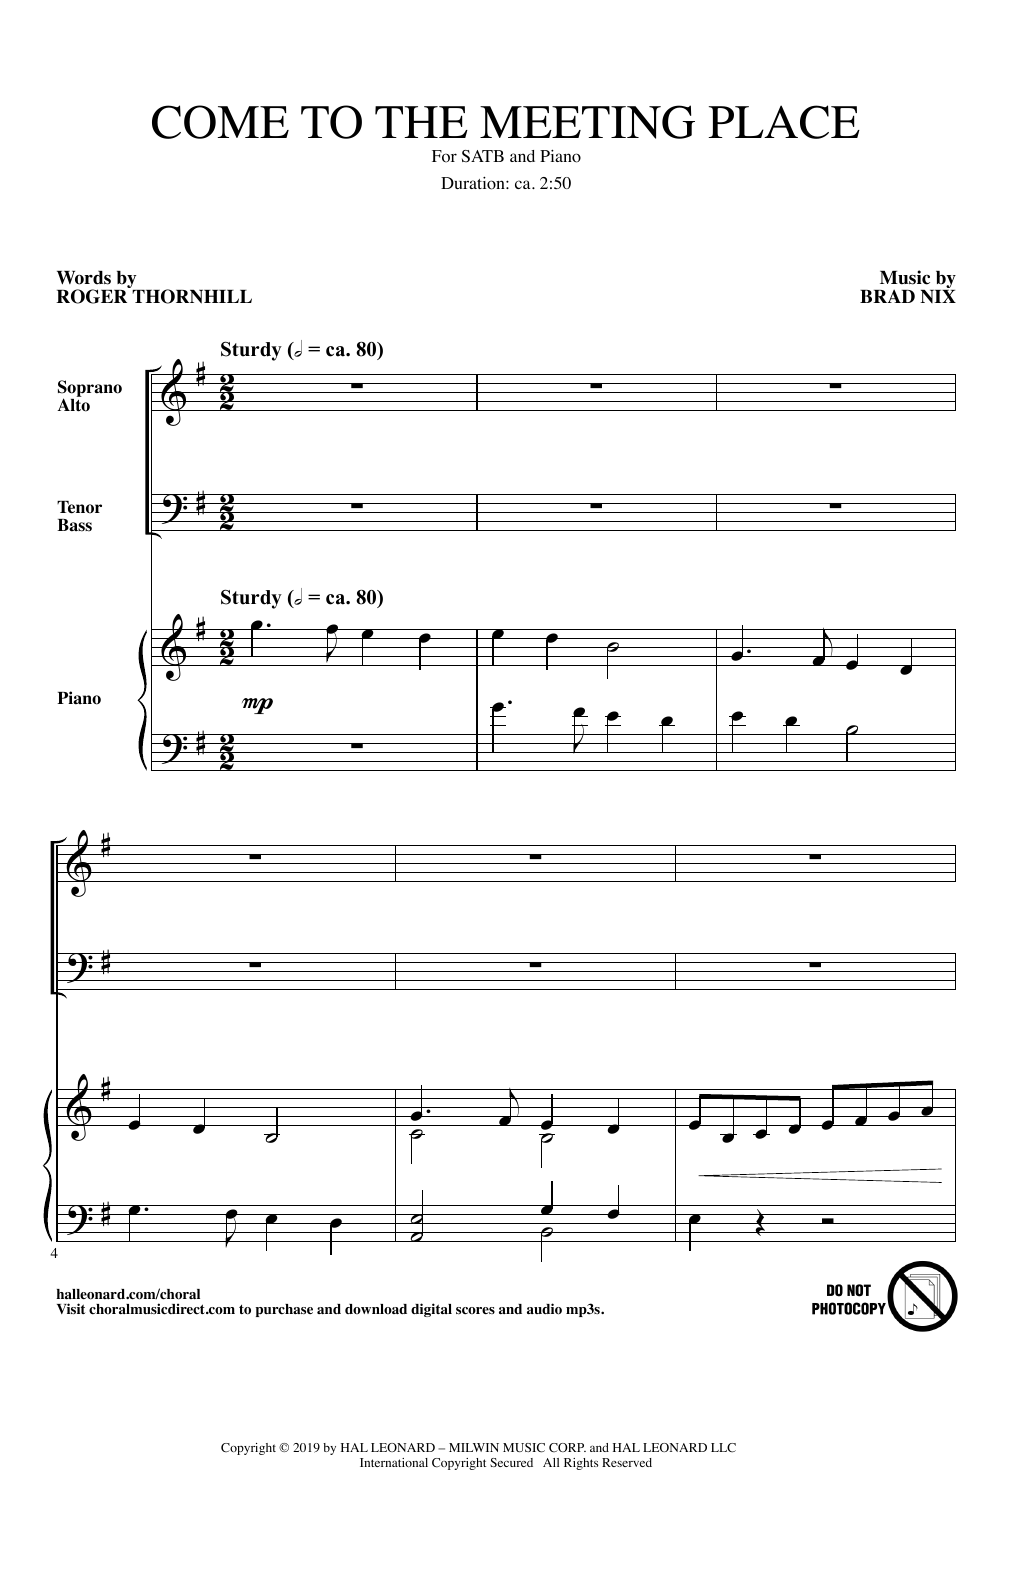 Download Roger Thornhill and Brad Nix Come To The Meeting Place Sheet Music